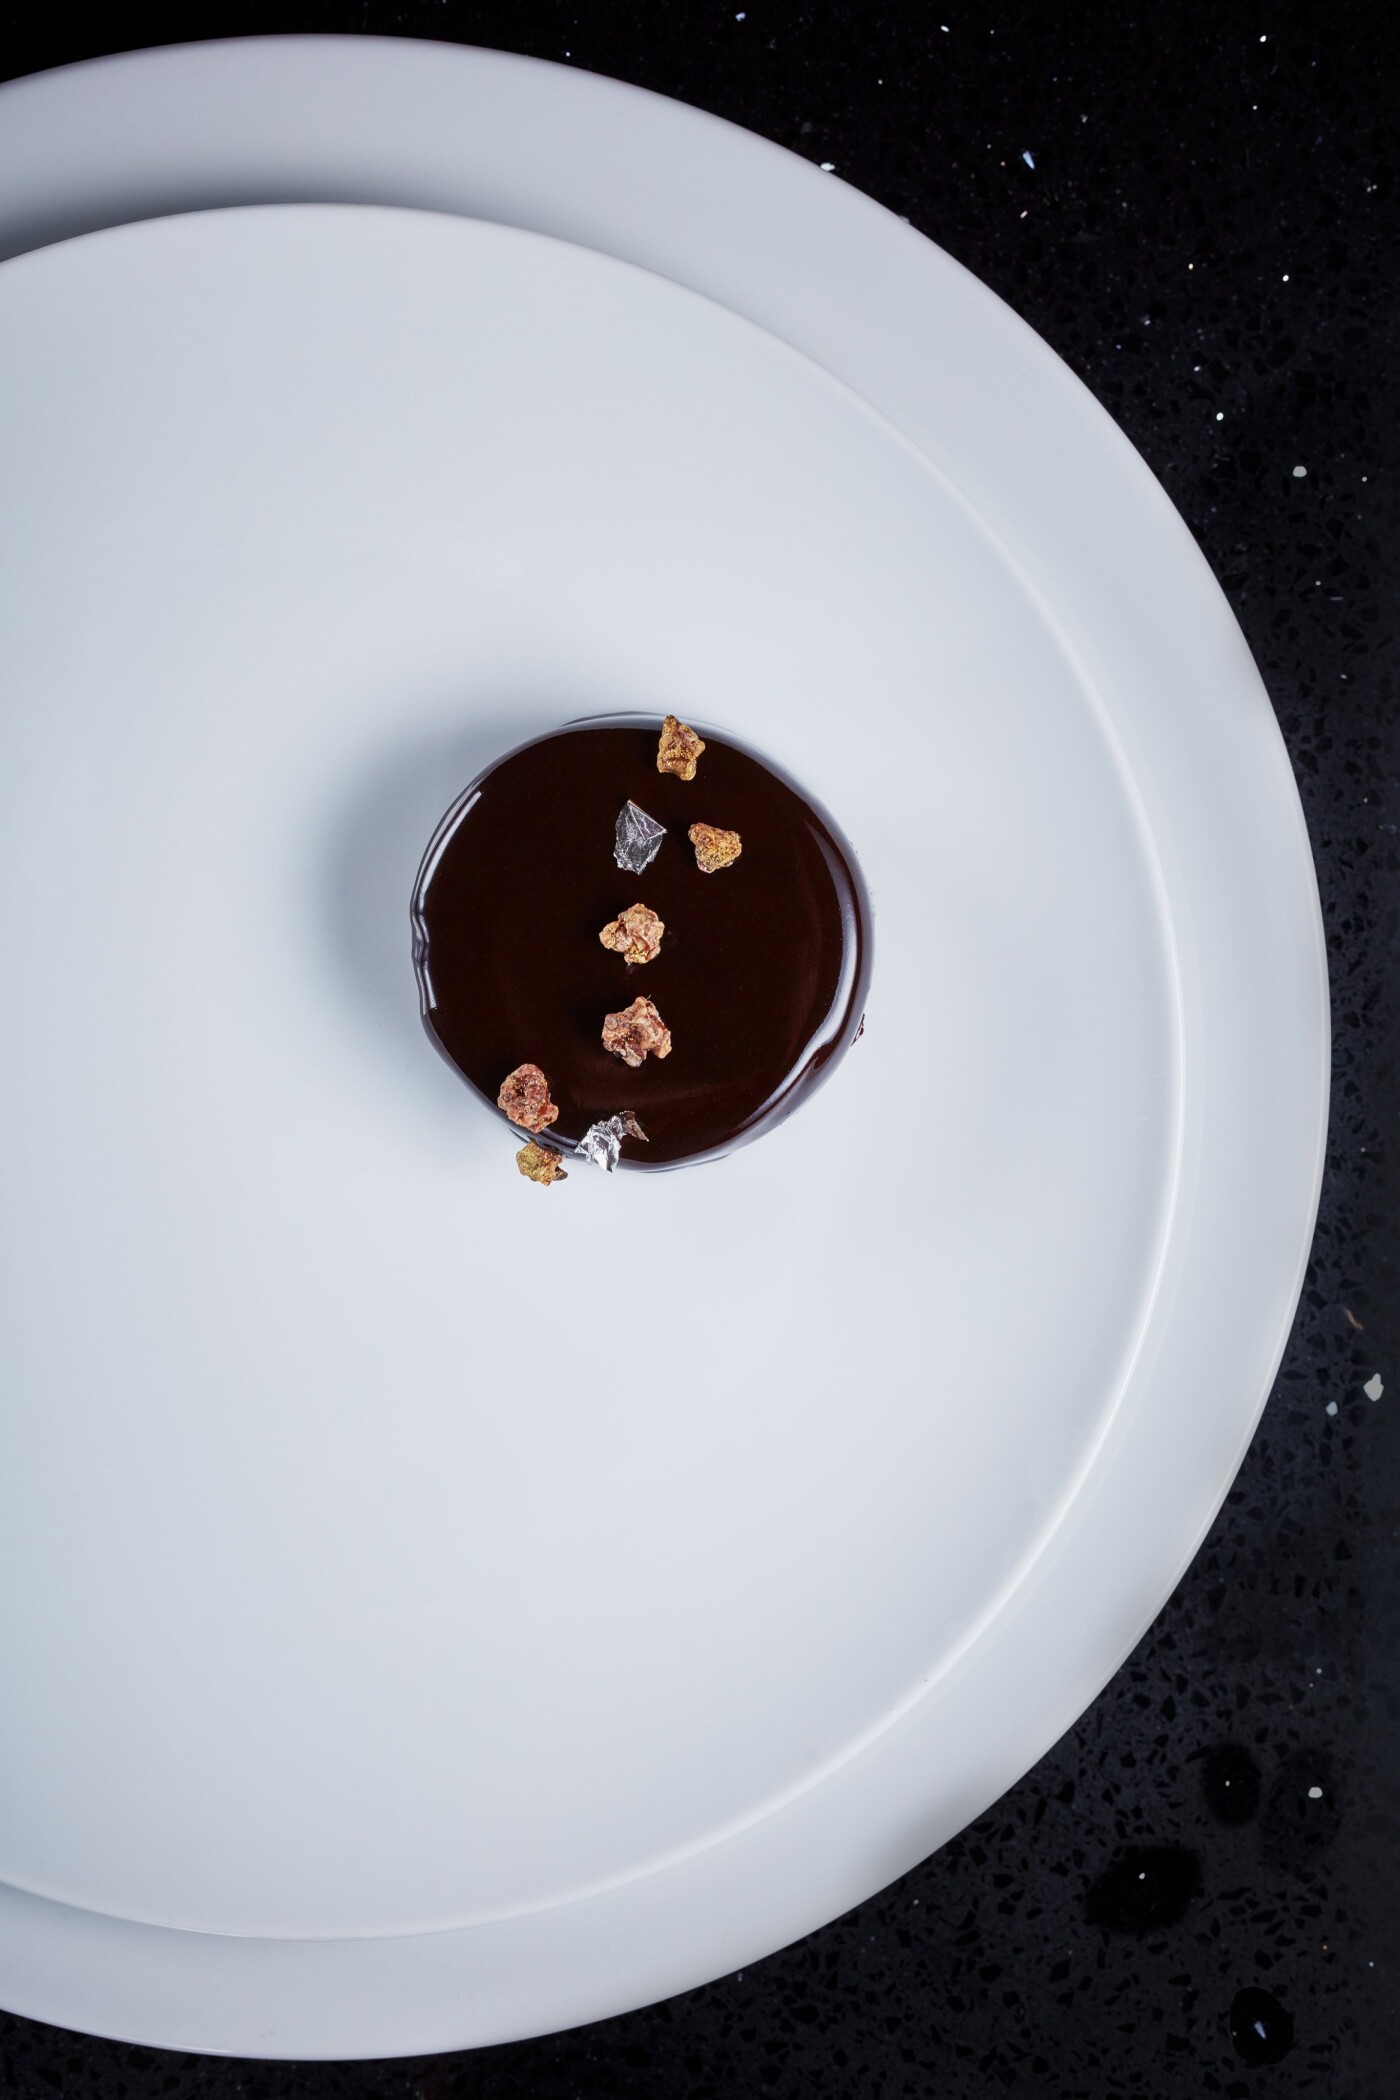 This was taken with executive pastry chef Andy Blas - such a simple, elegant chocolate torte with all the beautiful embellishment of silver leaf and nuts.<br />
<br />
It was for a commission by the wonderful Seasoned by Chefs magazine who I love shooting for.<br />
<br />
